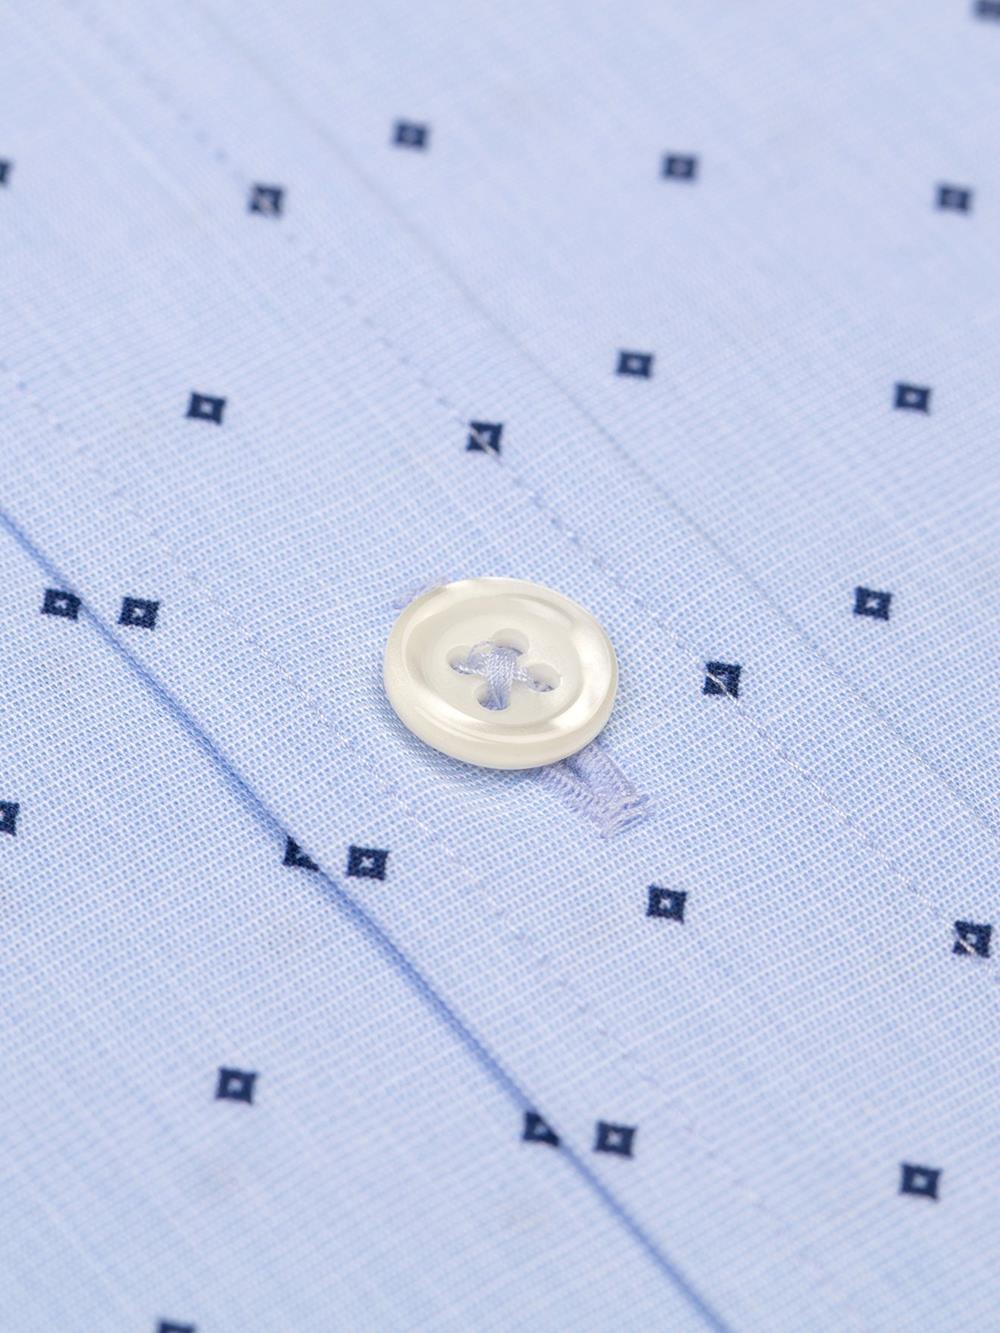 Grady sky blue slim fit shirt with printed pattern - Small collar